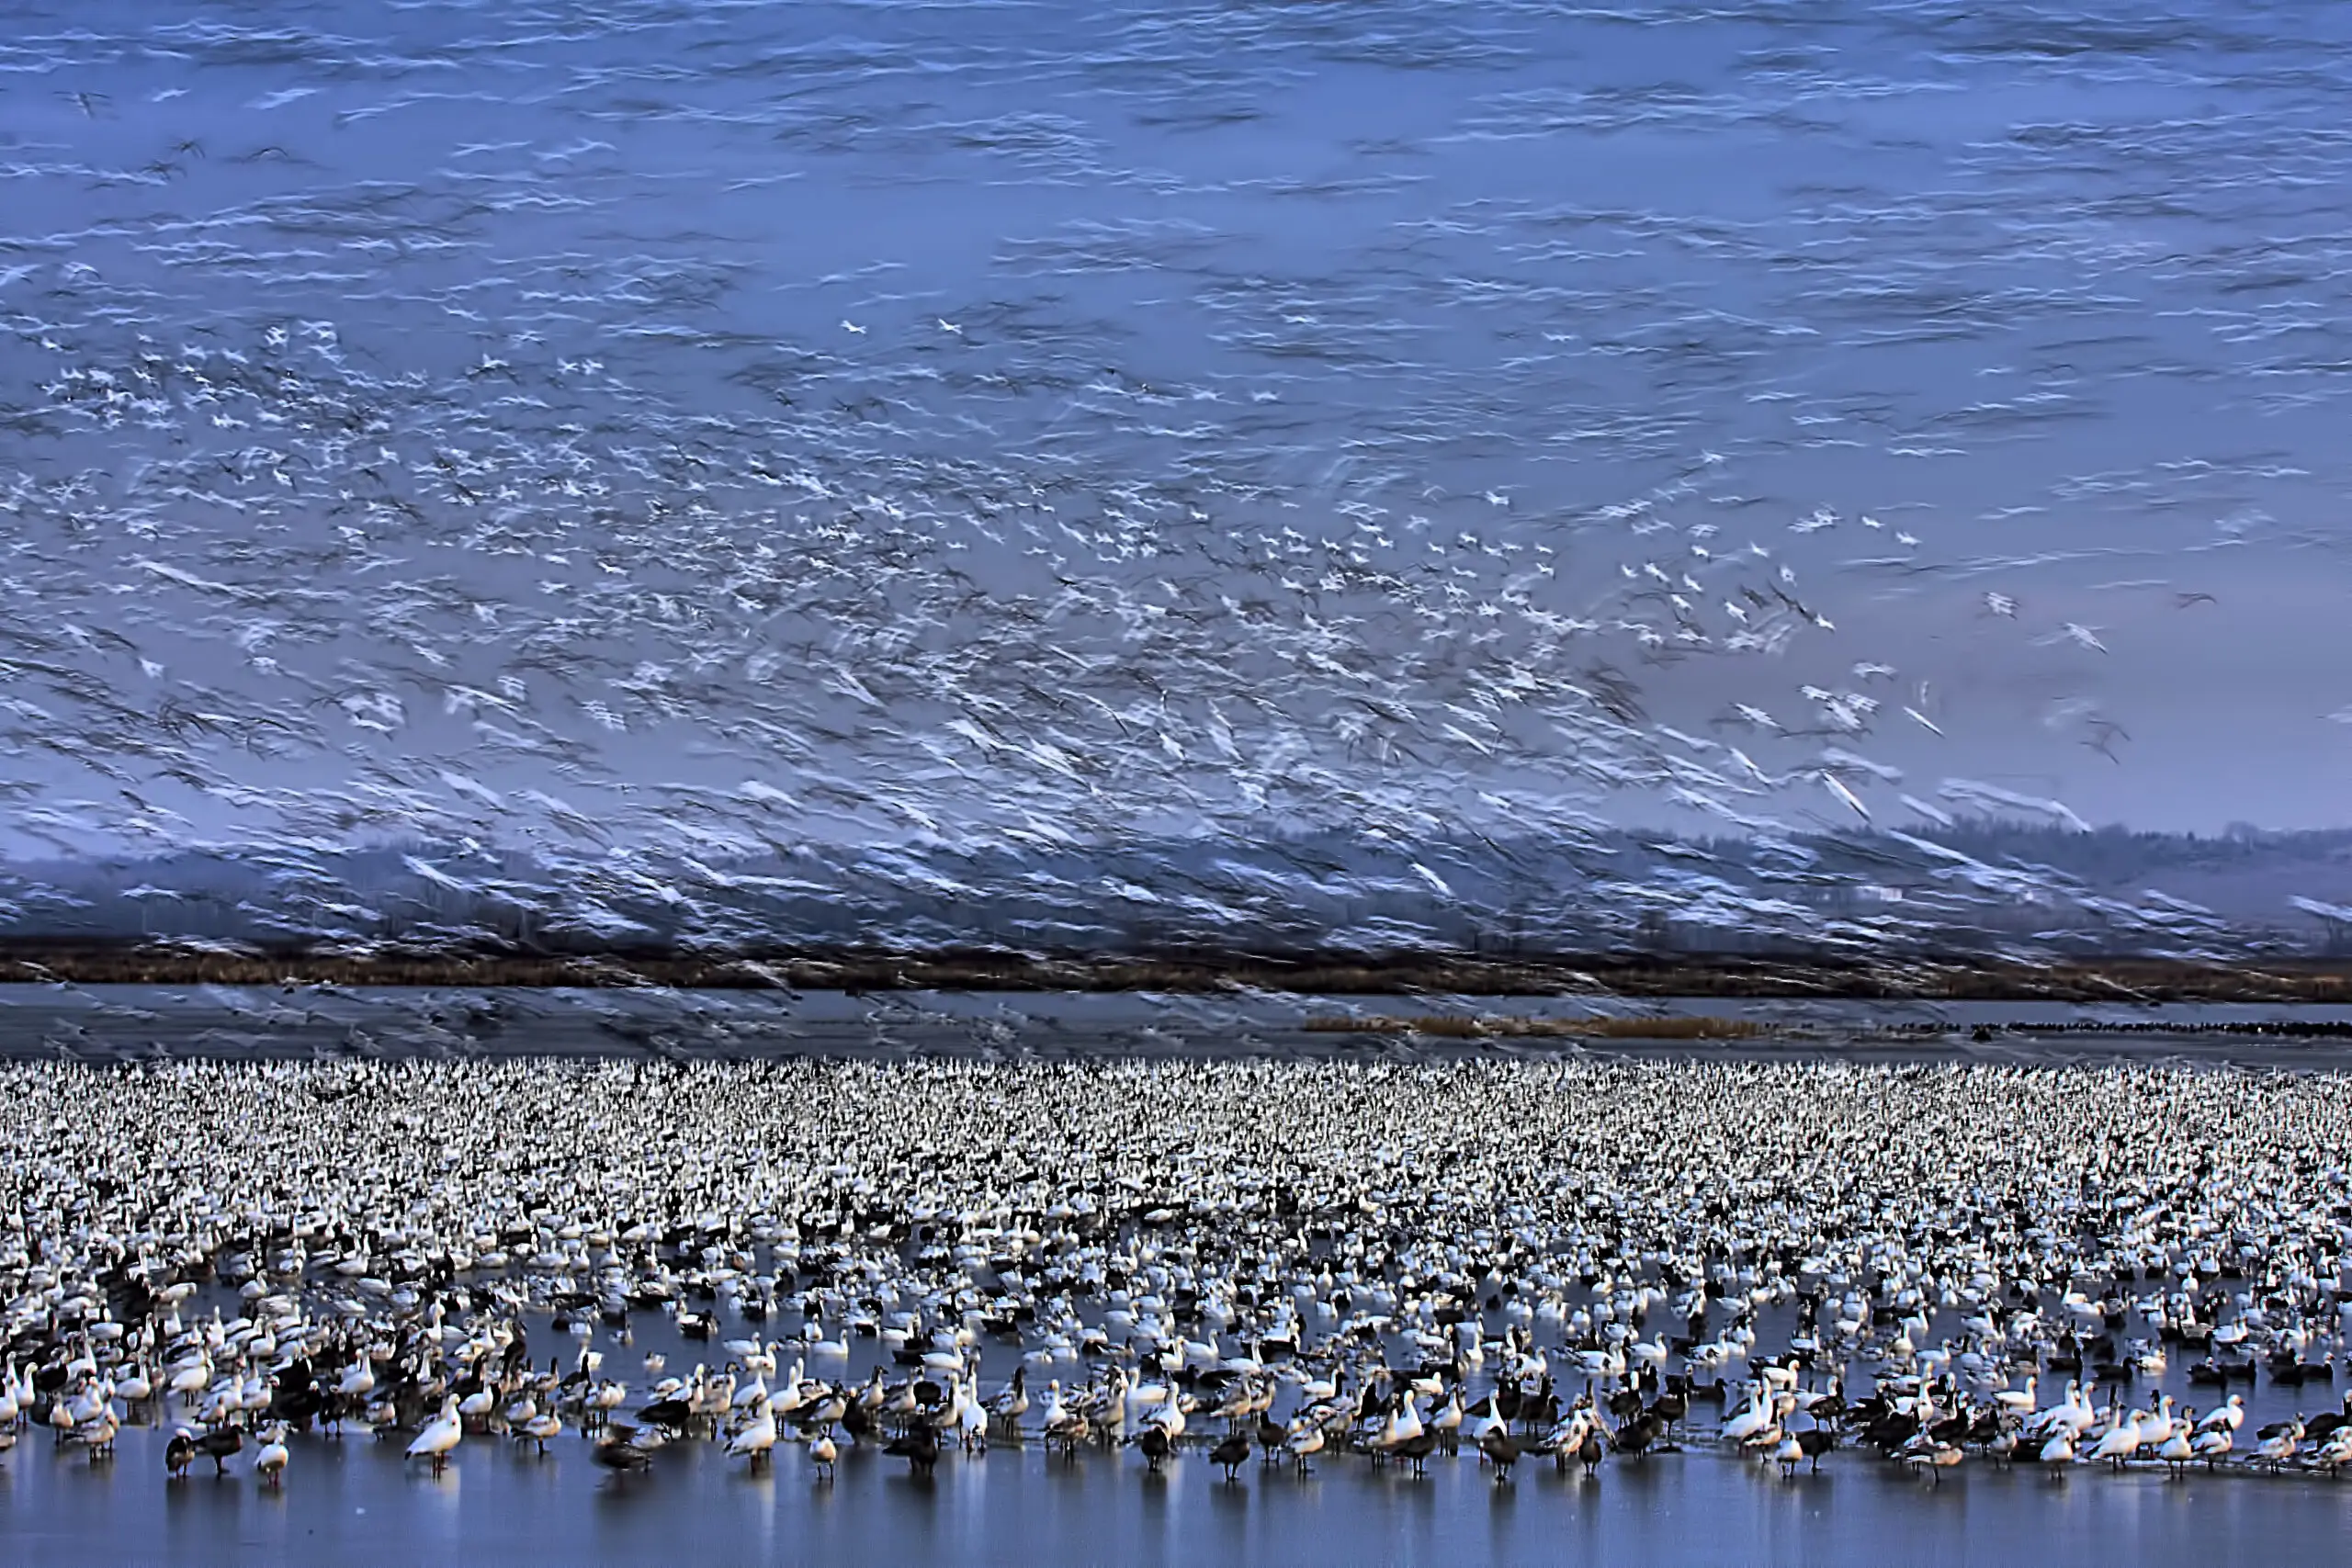 Before Dawn - A Day of Snow Goose Migration